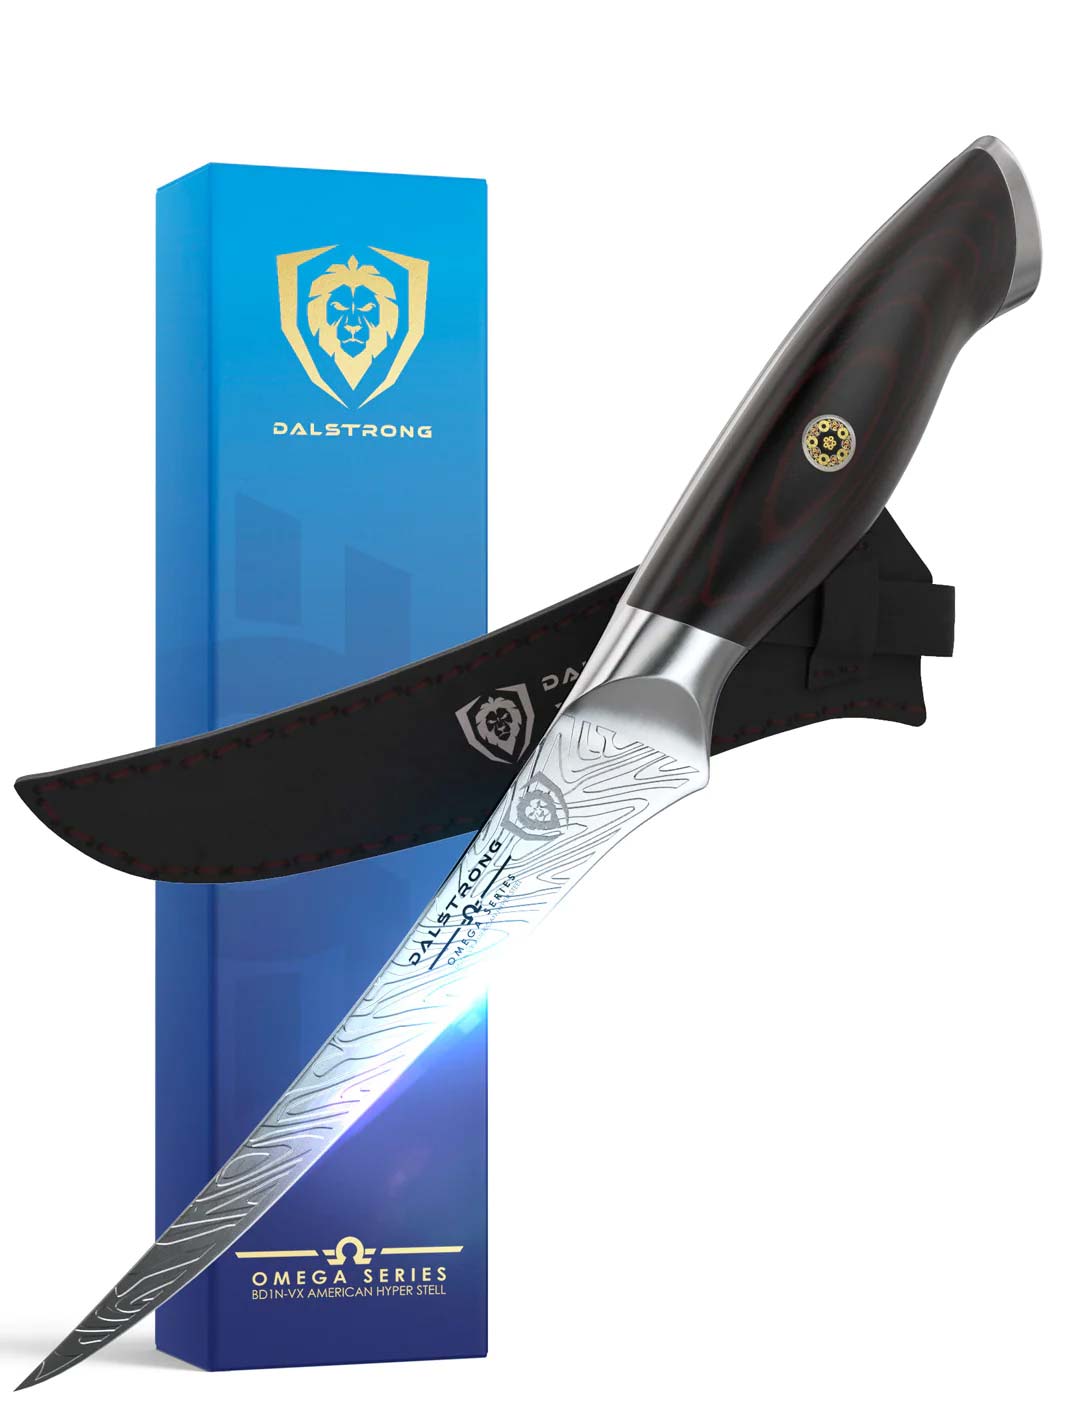 Dalstrong omega series curved boning knife in front of it's premium packaging.